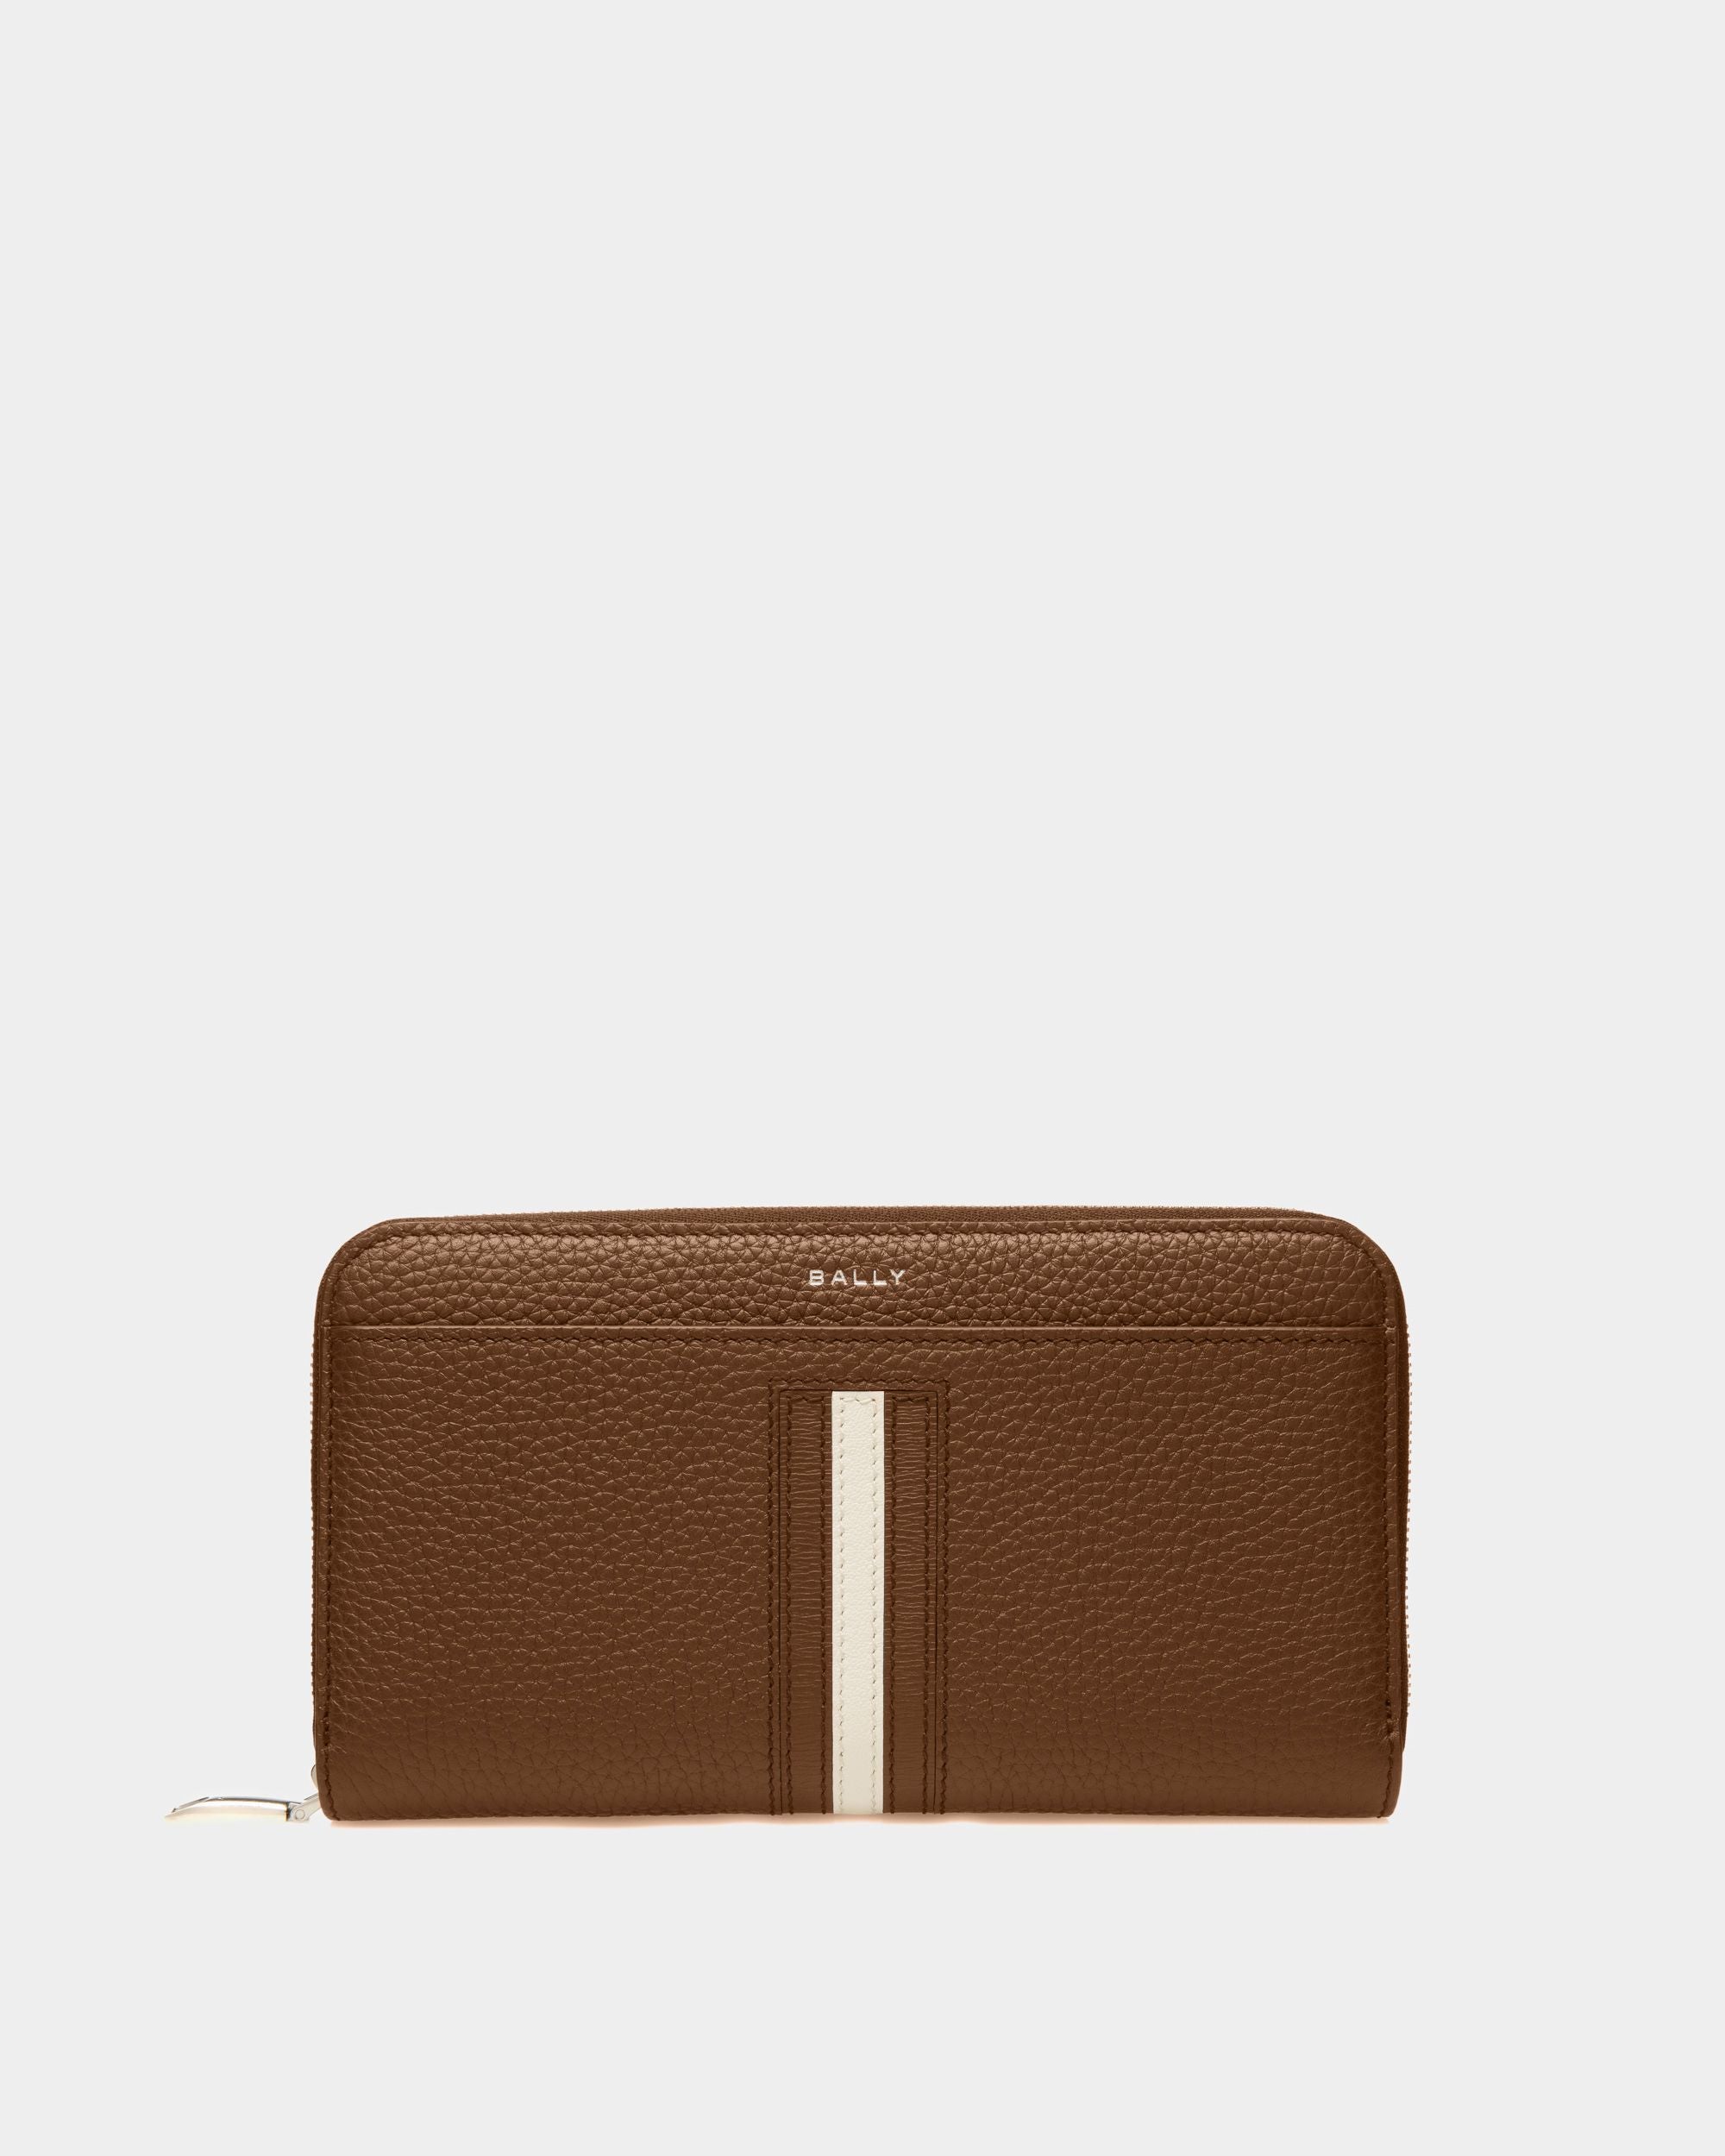 Ribbon Wallet | Men's Accessories | Brown Leather | Bally | Still Life Front